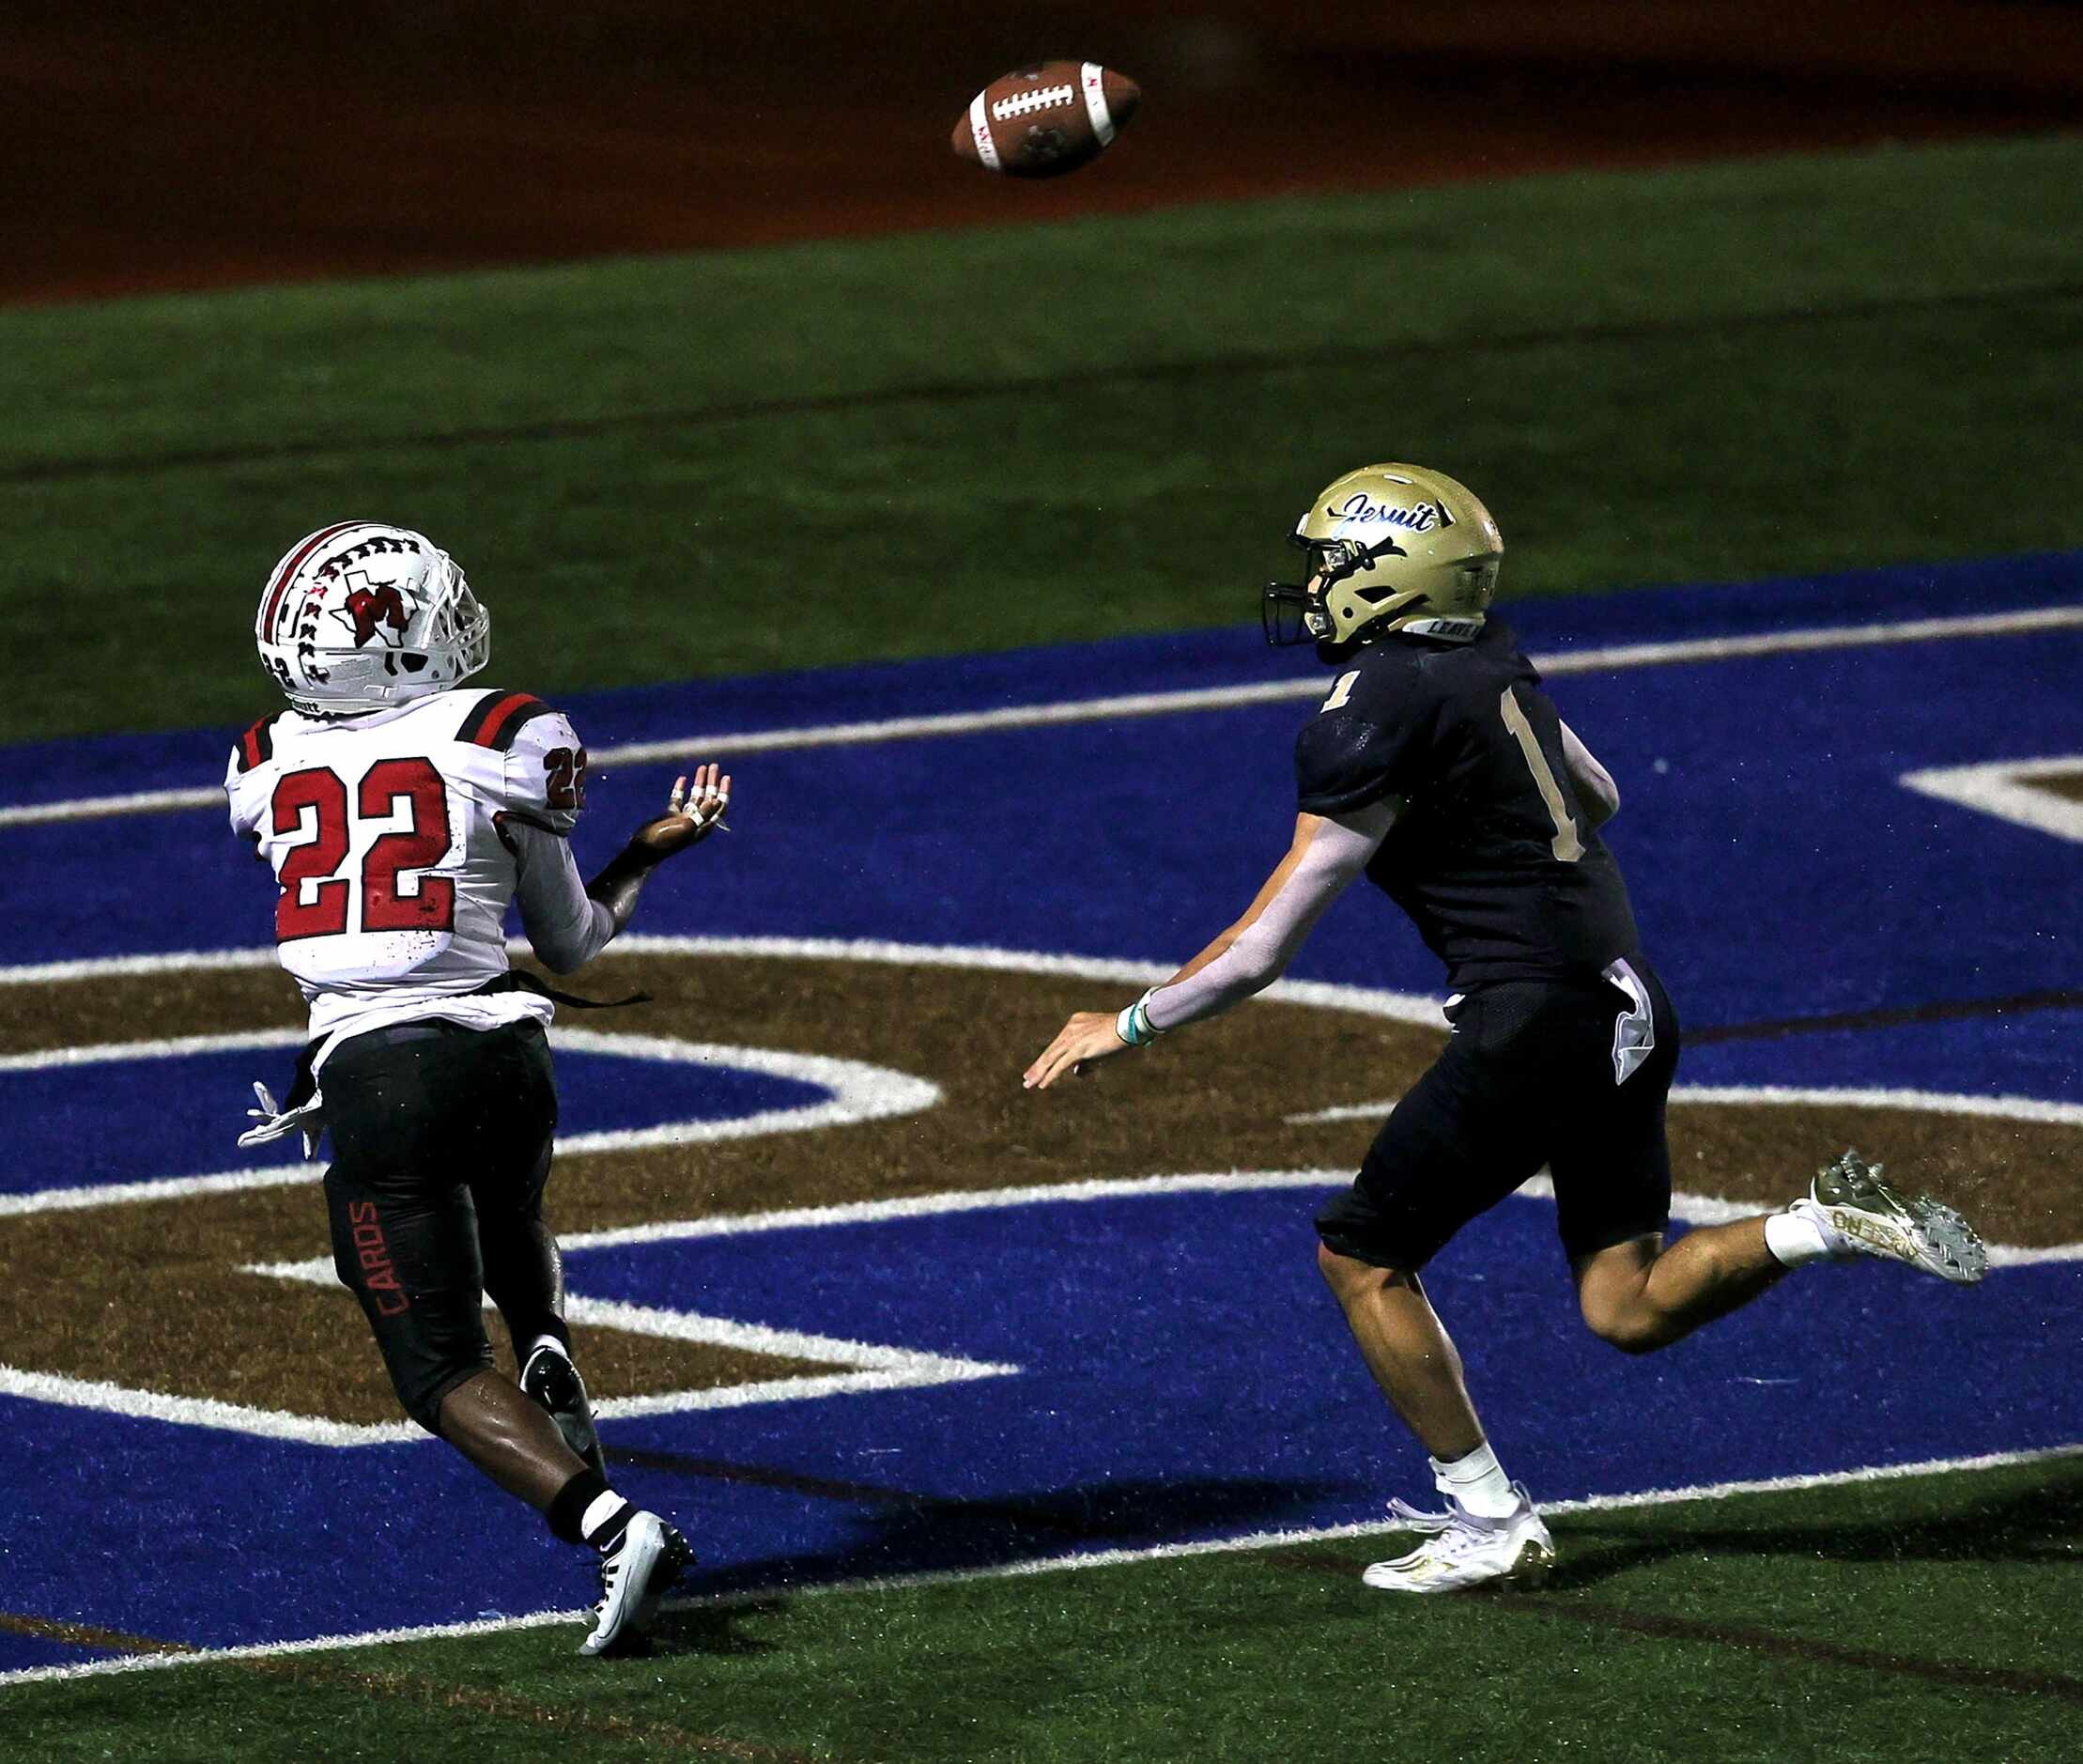 MacArthur running back Jerbrandin Henderson (22) comes up with a 19 yard touchdown reception...